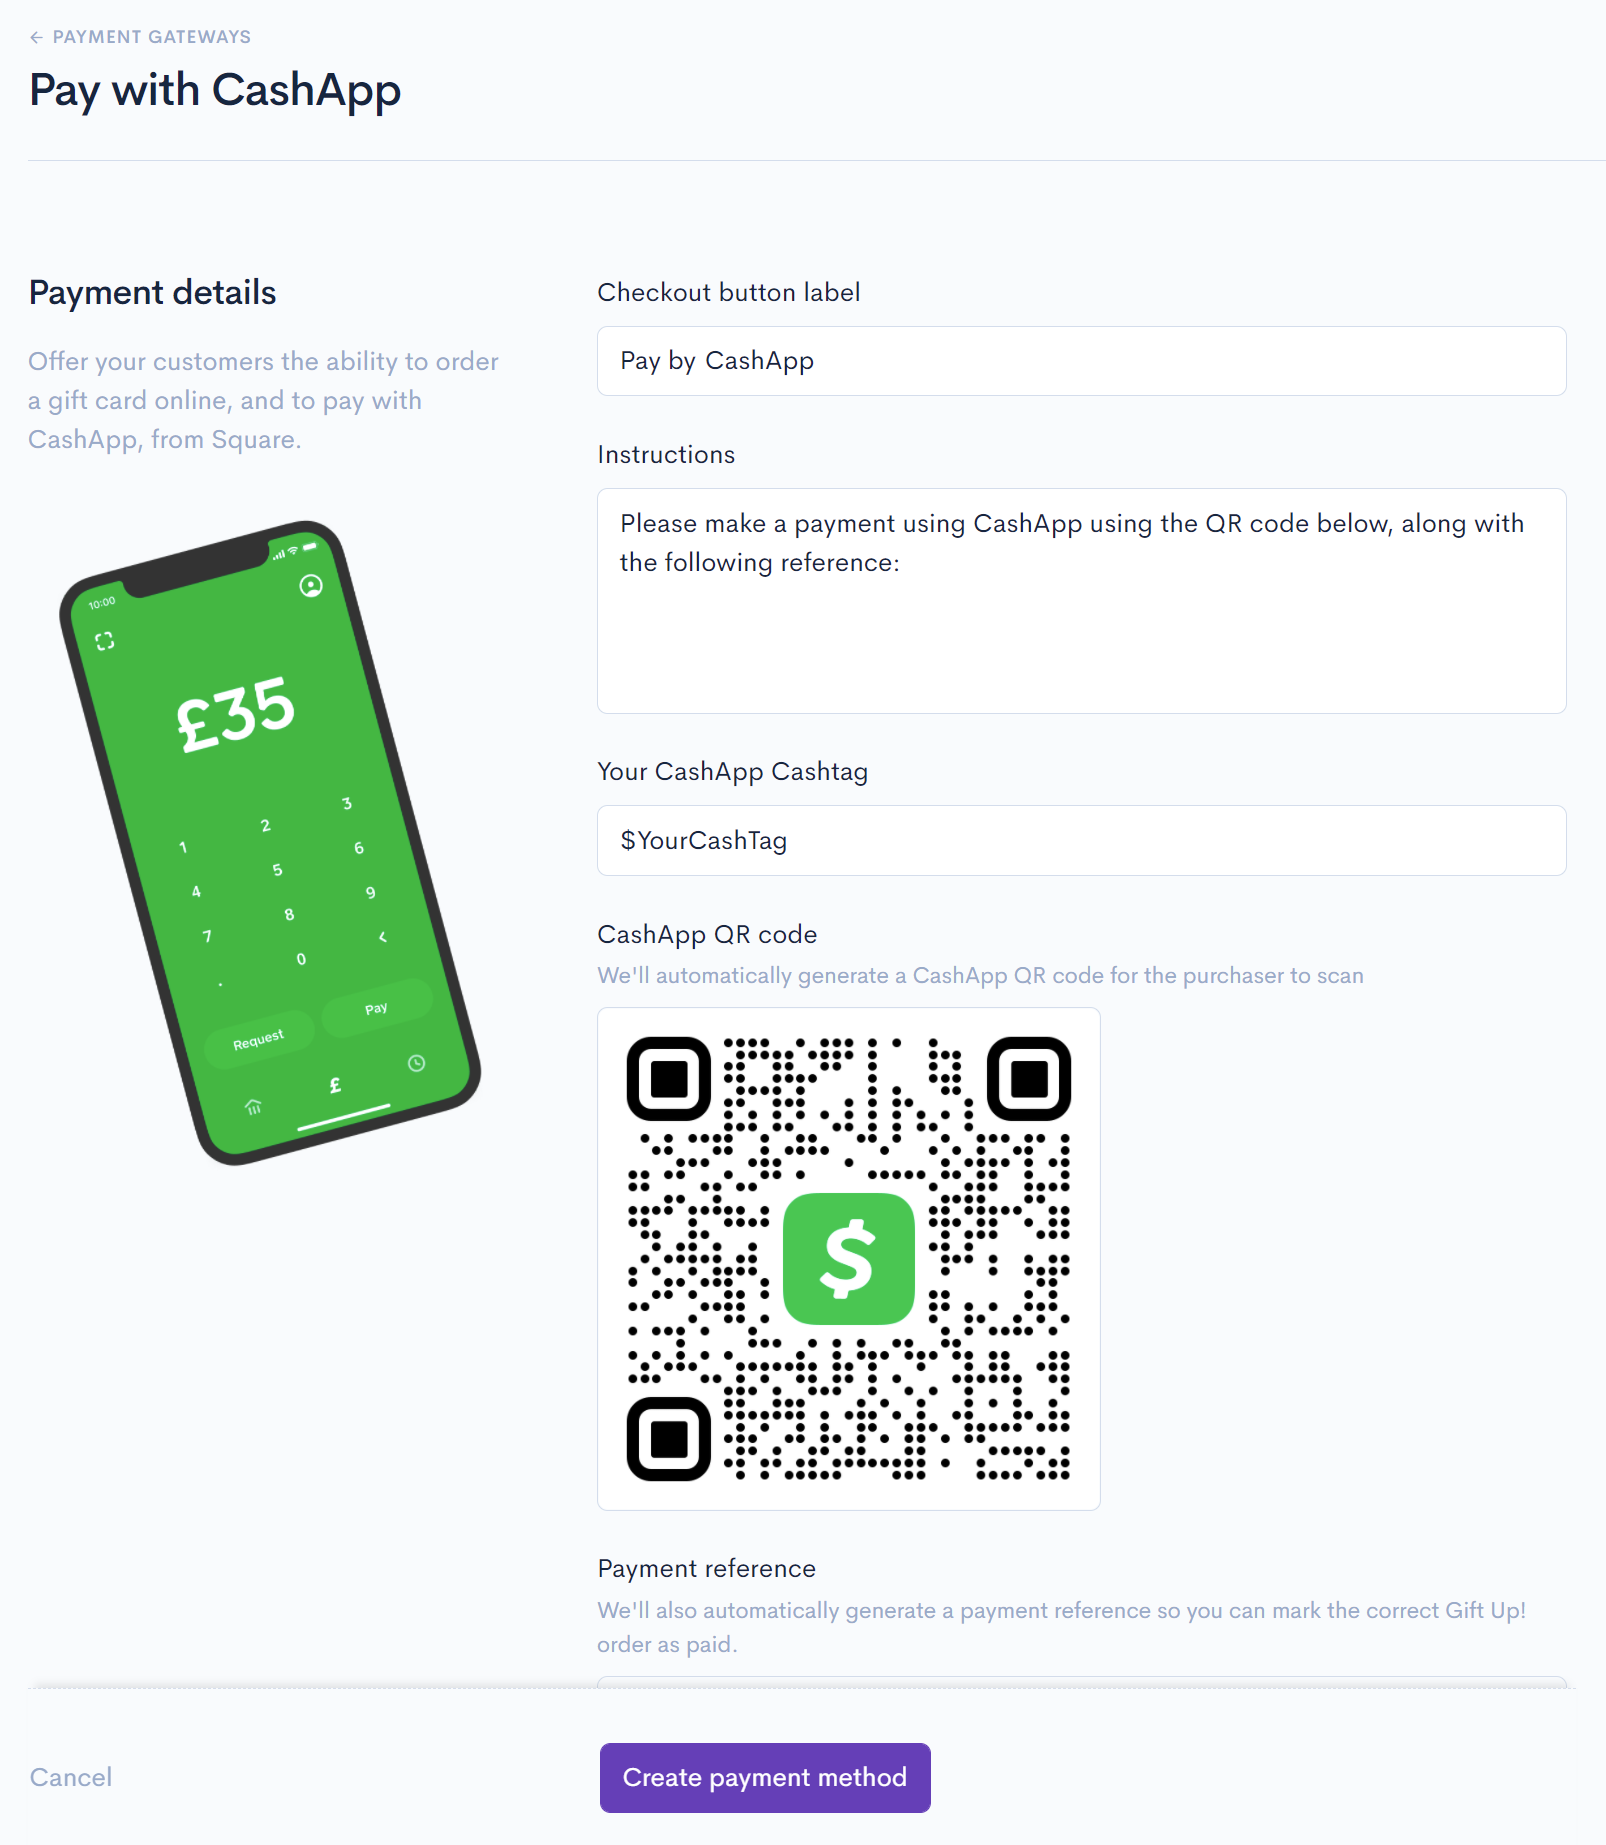 Effortlessly Sell Gift Cards for Cash and Get Paid Instantly with Cash App